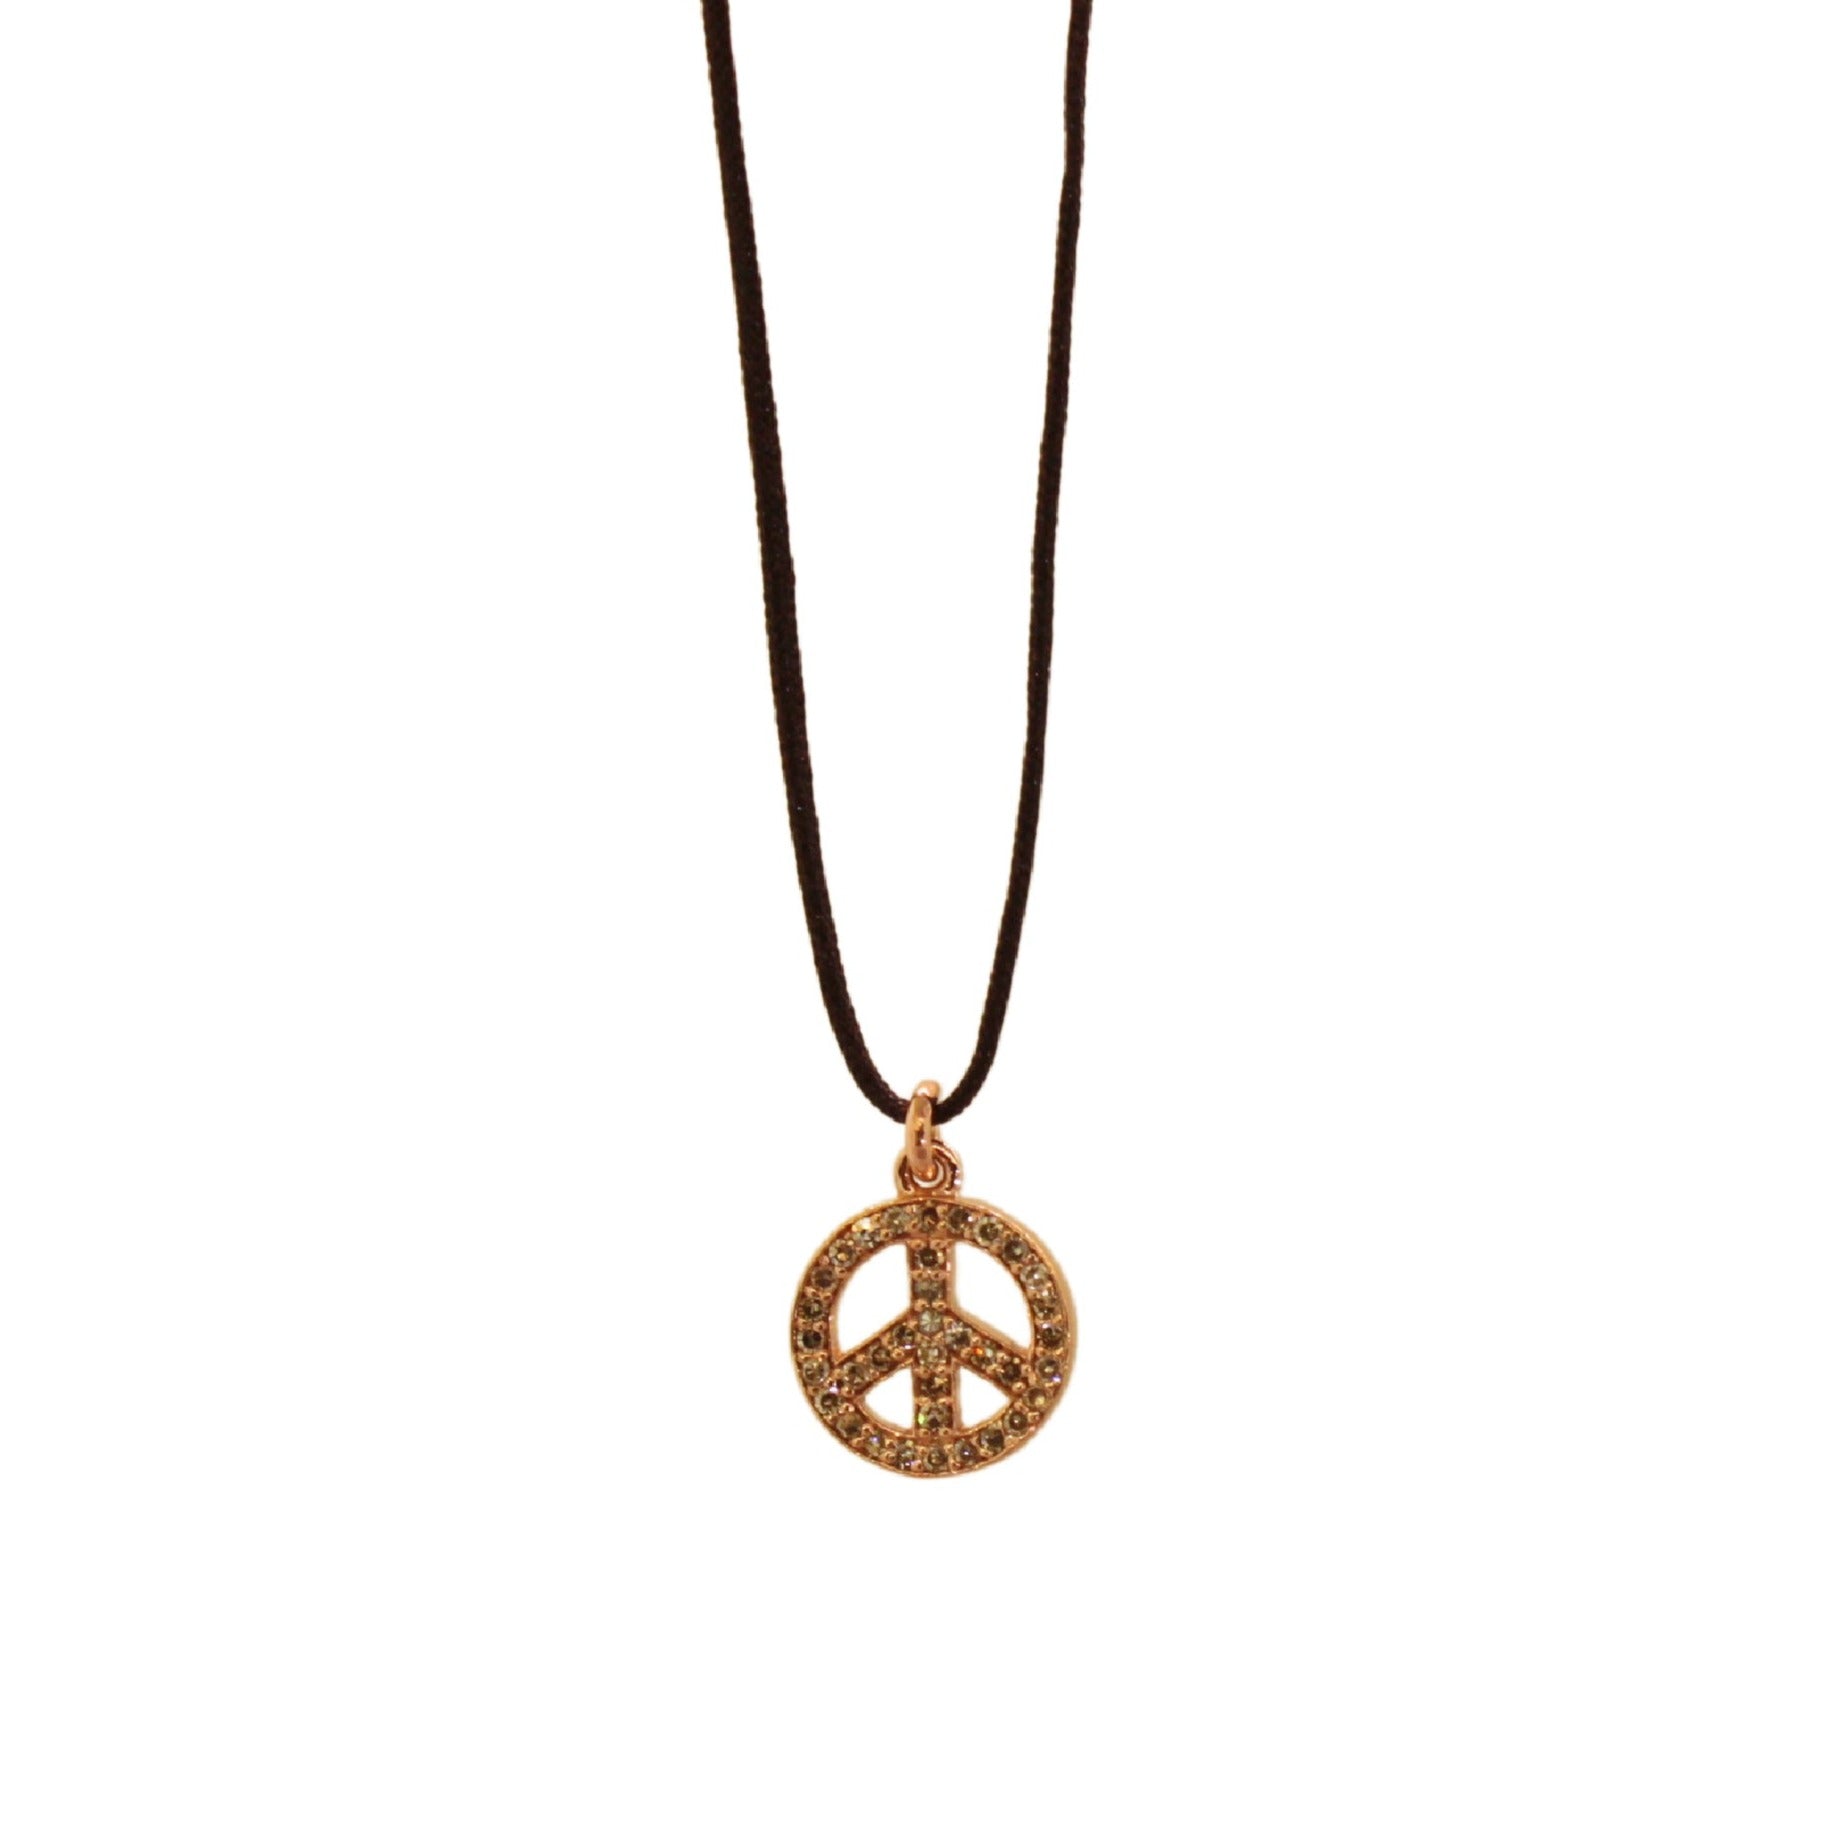 Double Sided Pave Diamond Peace Sign Necklace